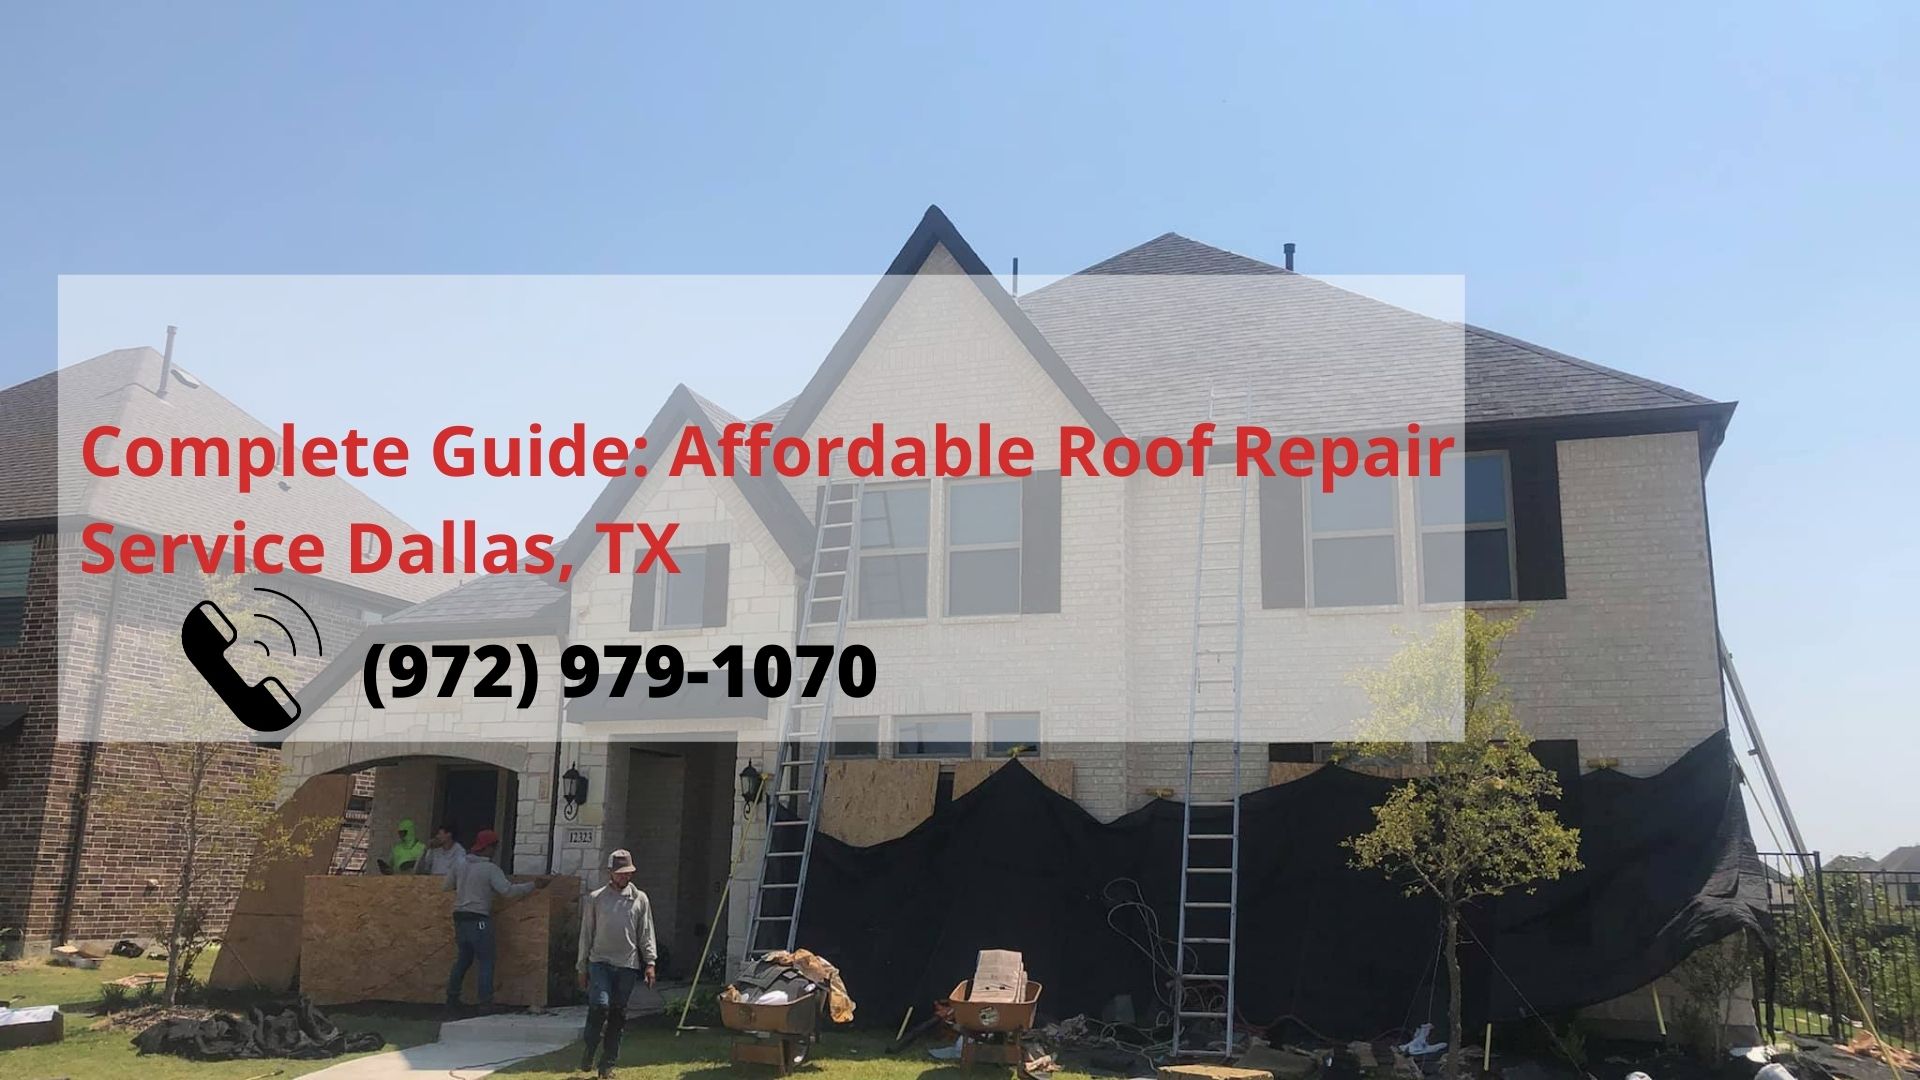 Complete Guide: Affordable Roof Repair Service Dallas, TX